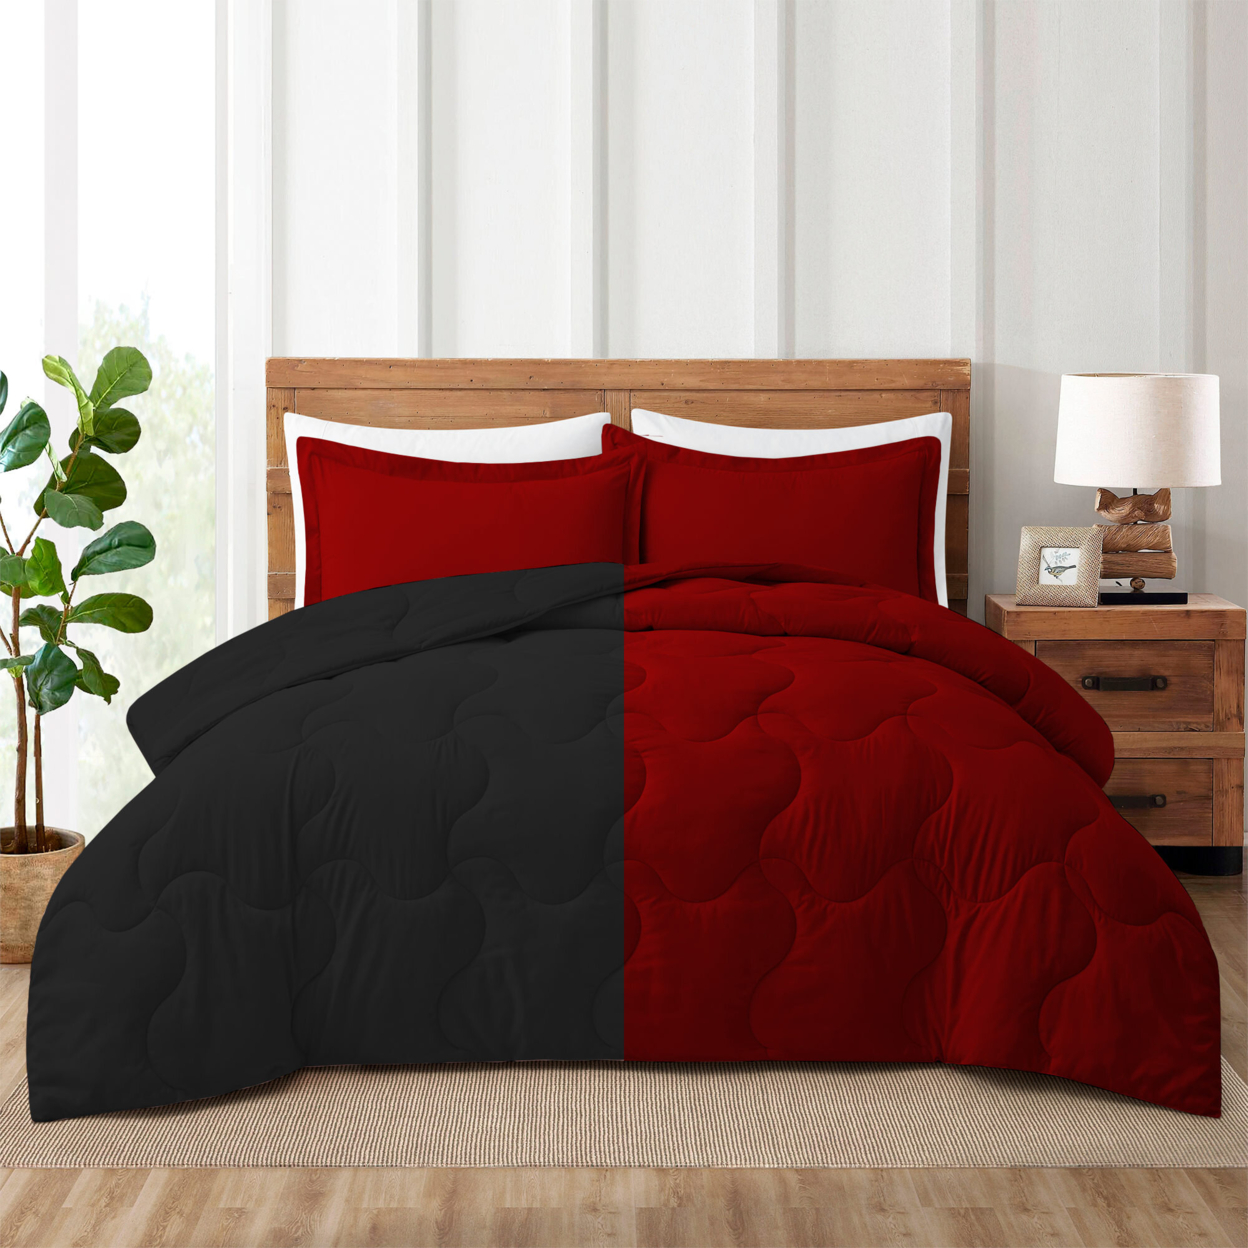 3 Or 2 Pieces Lightweight Reversible Comforter Set With Pillow Shams - Red/Black, Twin